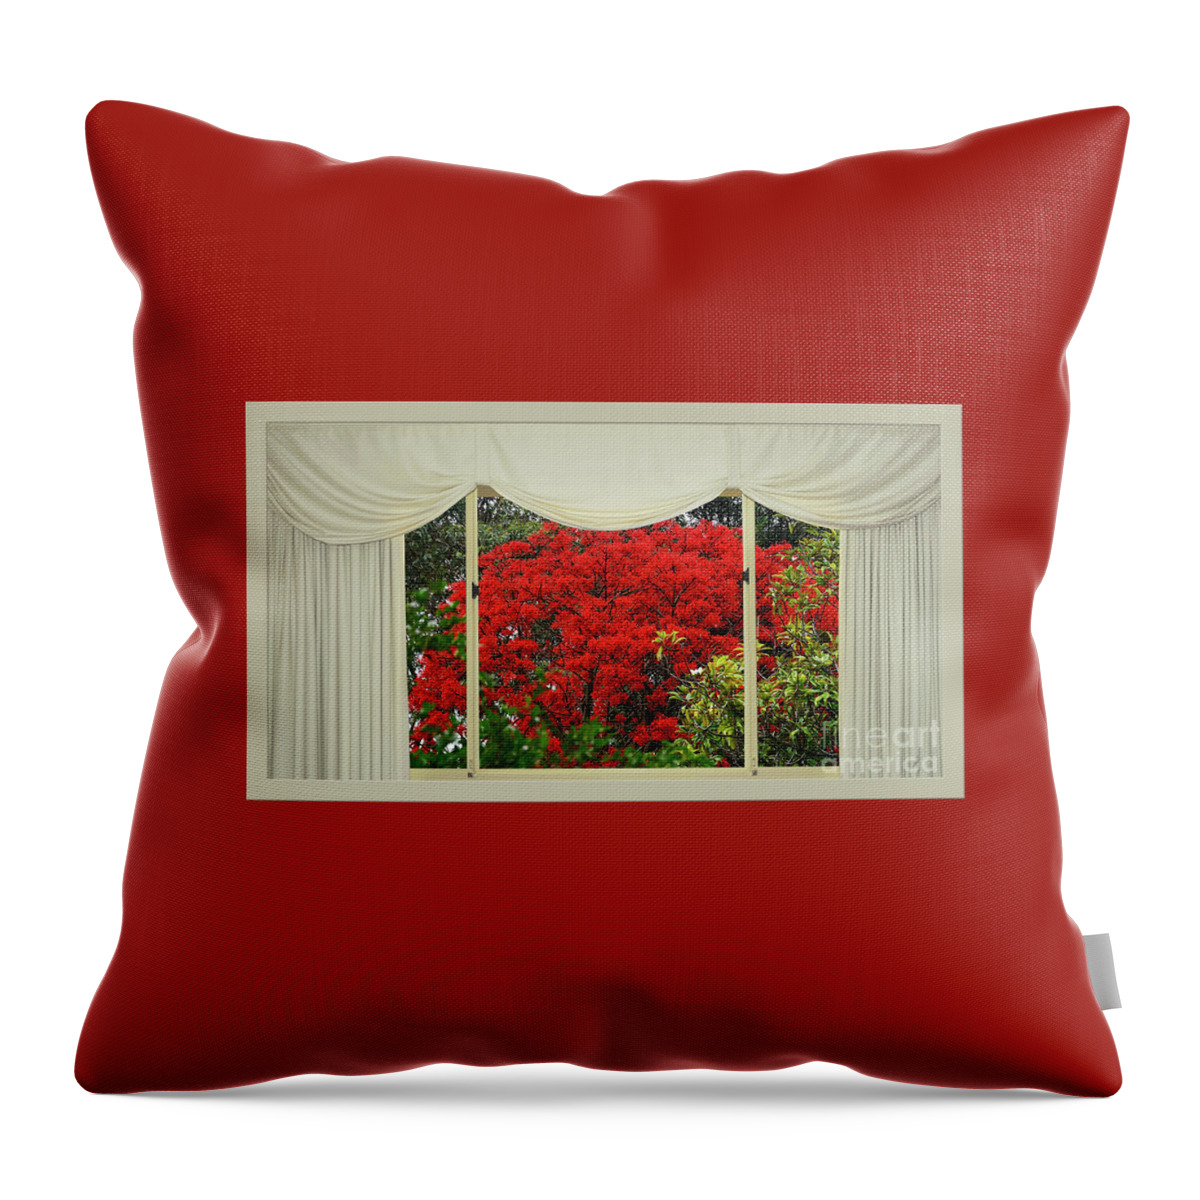 Vibrant Red Blossoms Window View Throw Pillow featuring the photograph Vibrant Red Blossoms Window View by Kaye Menner by Kaye Menner